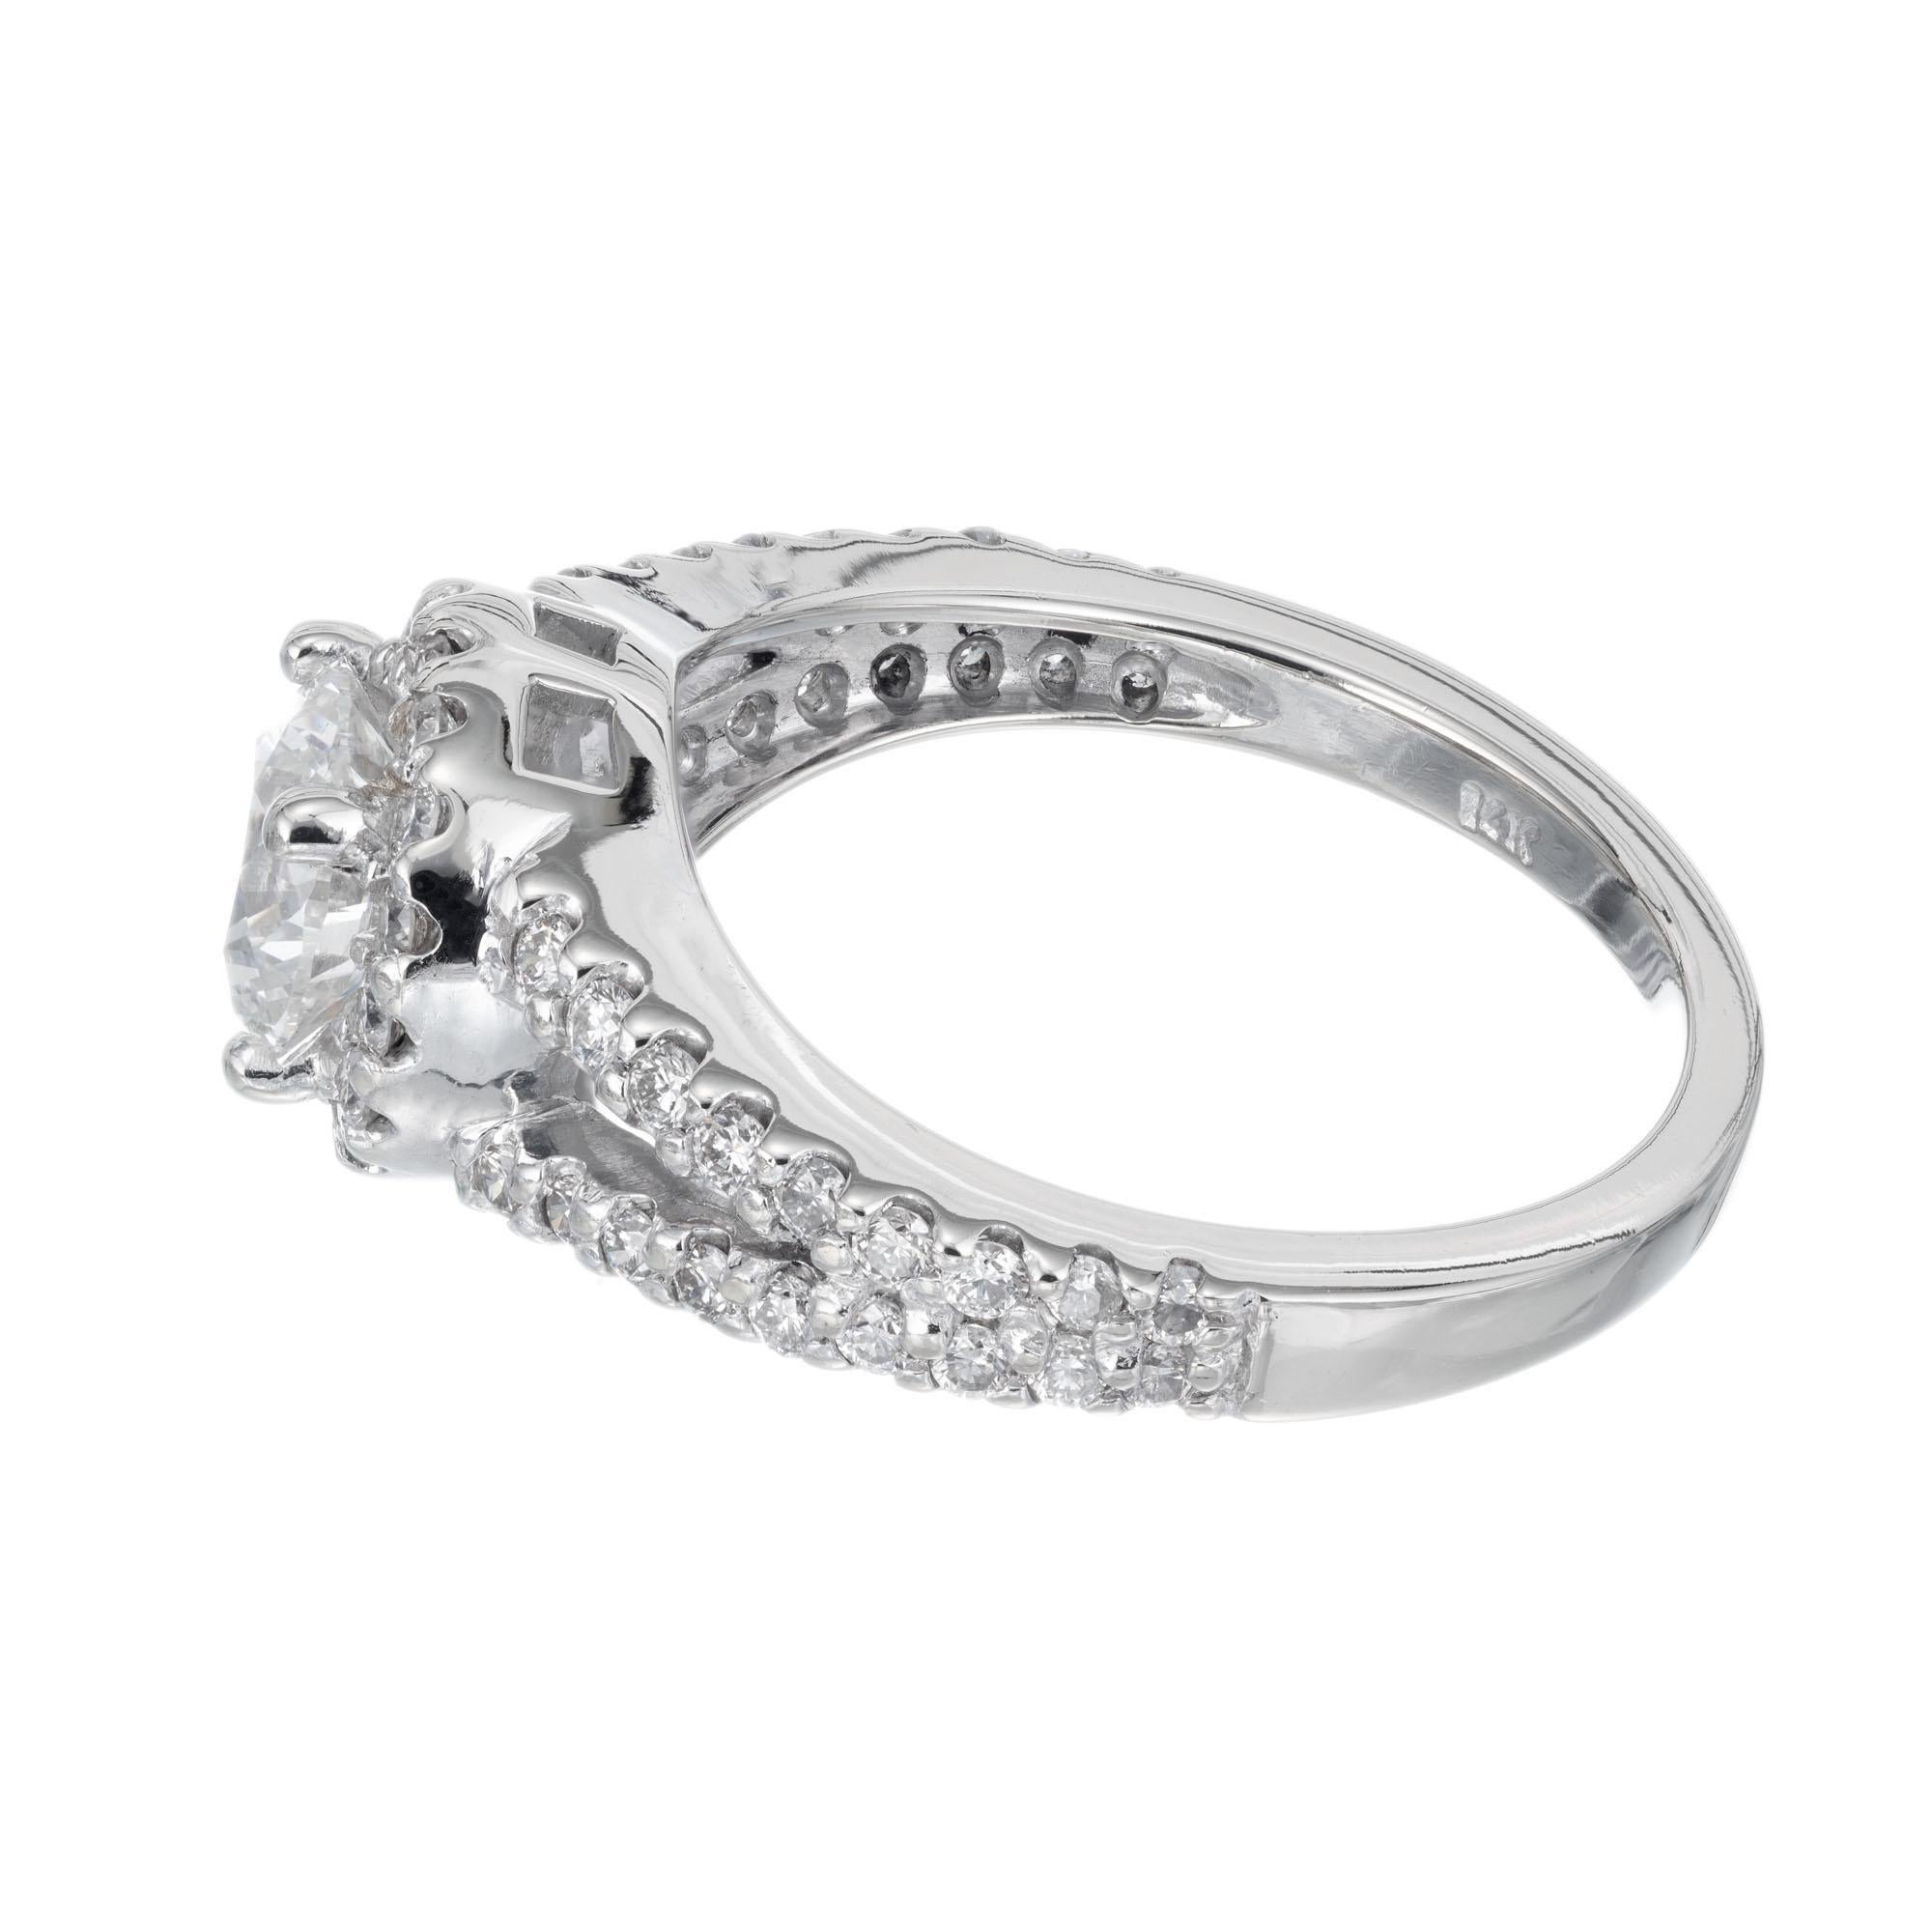 EGL Certified 1.02 Carat Diamond Platinum Engagement Ring In Excellent Condition For Sale In Stamford, CT